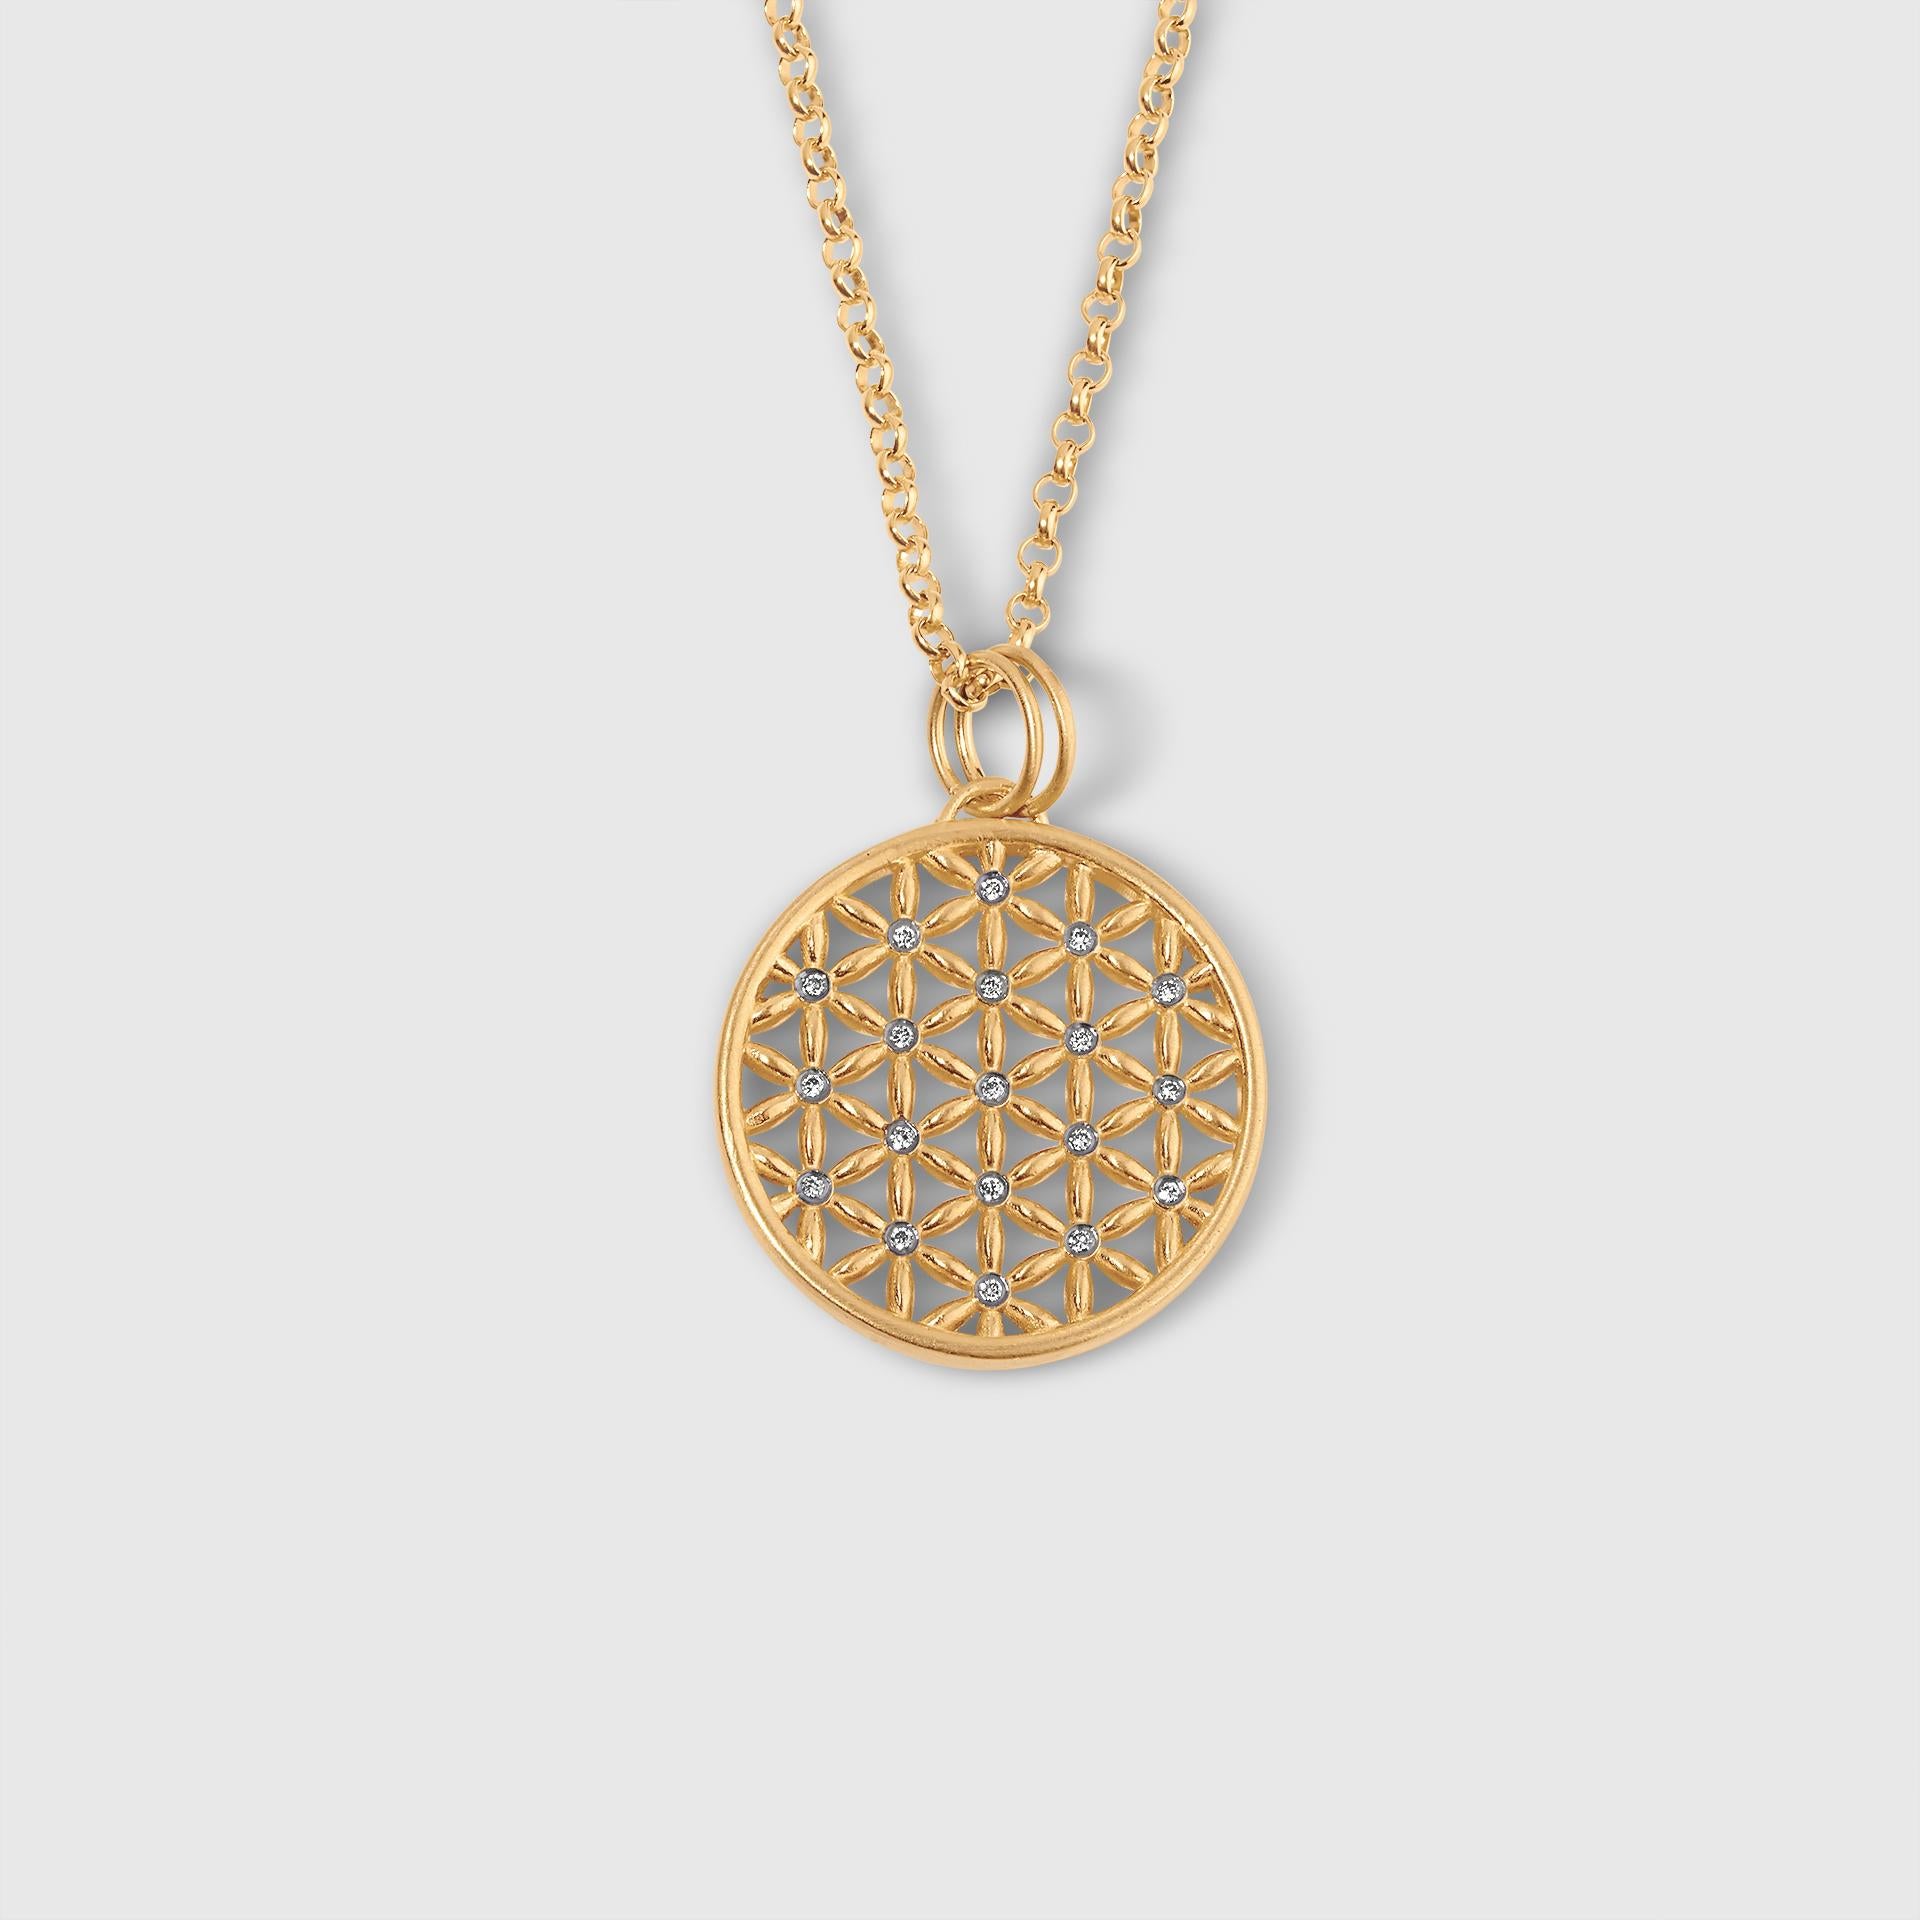 Hanedan Mandala Necklace Flower of Life Pendant Necklace, 24kt Yellow Gold and Silver, Size Large, Length: 21